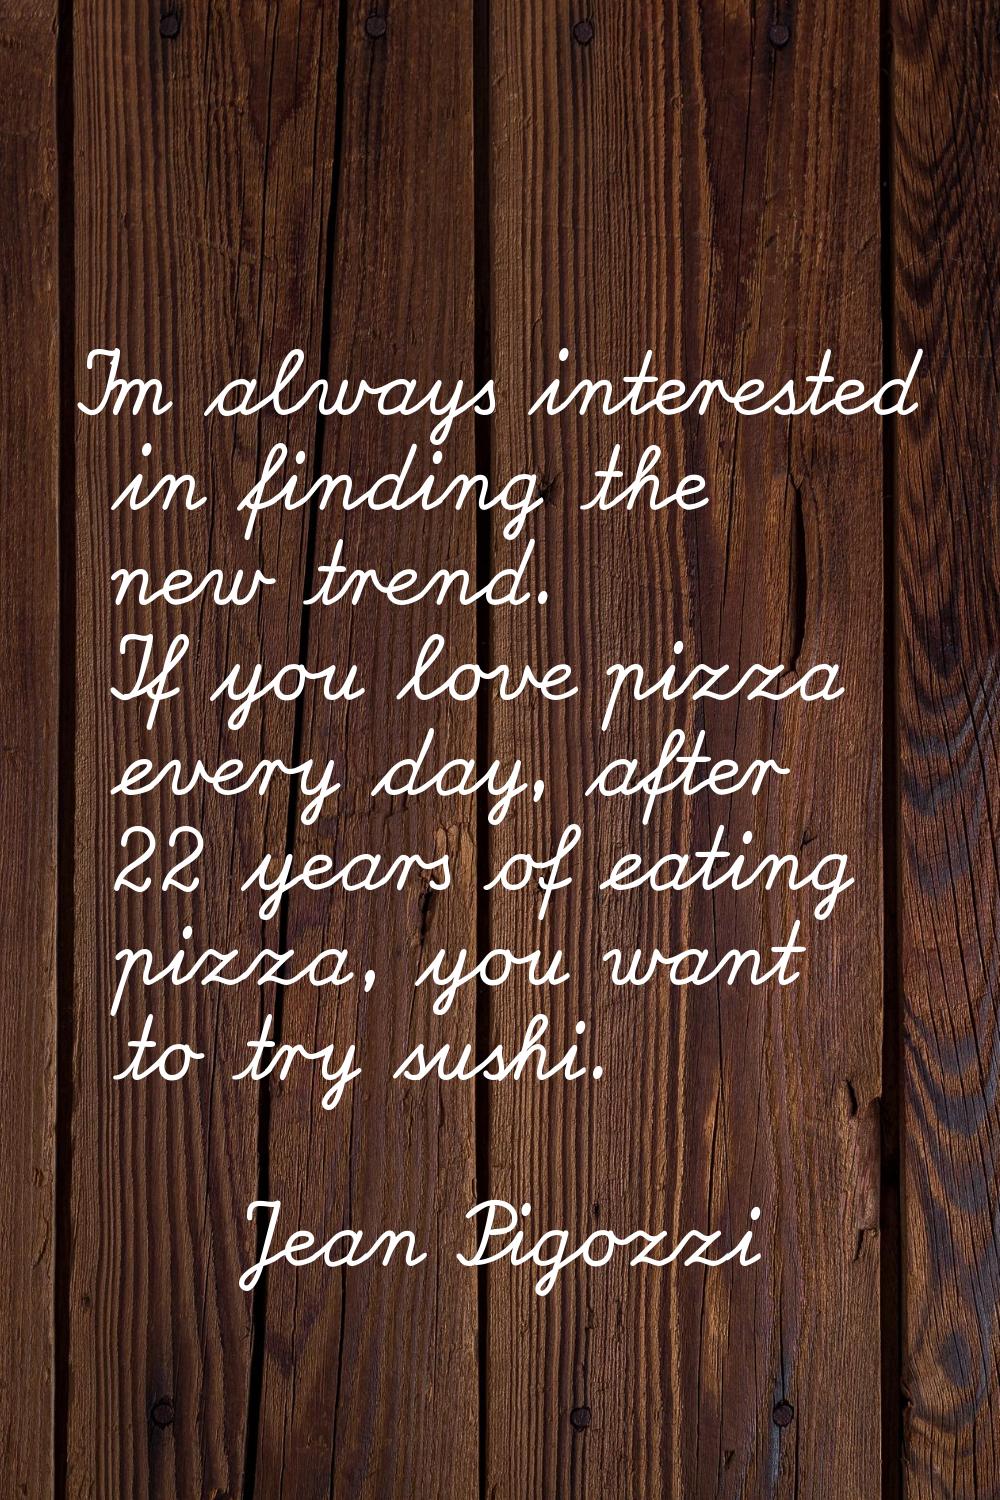 I'm always interested in finding the new trend. If you love pizza every day, after 22 years of eati